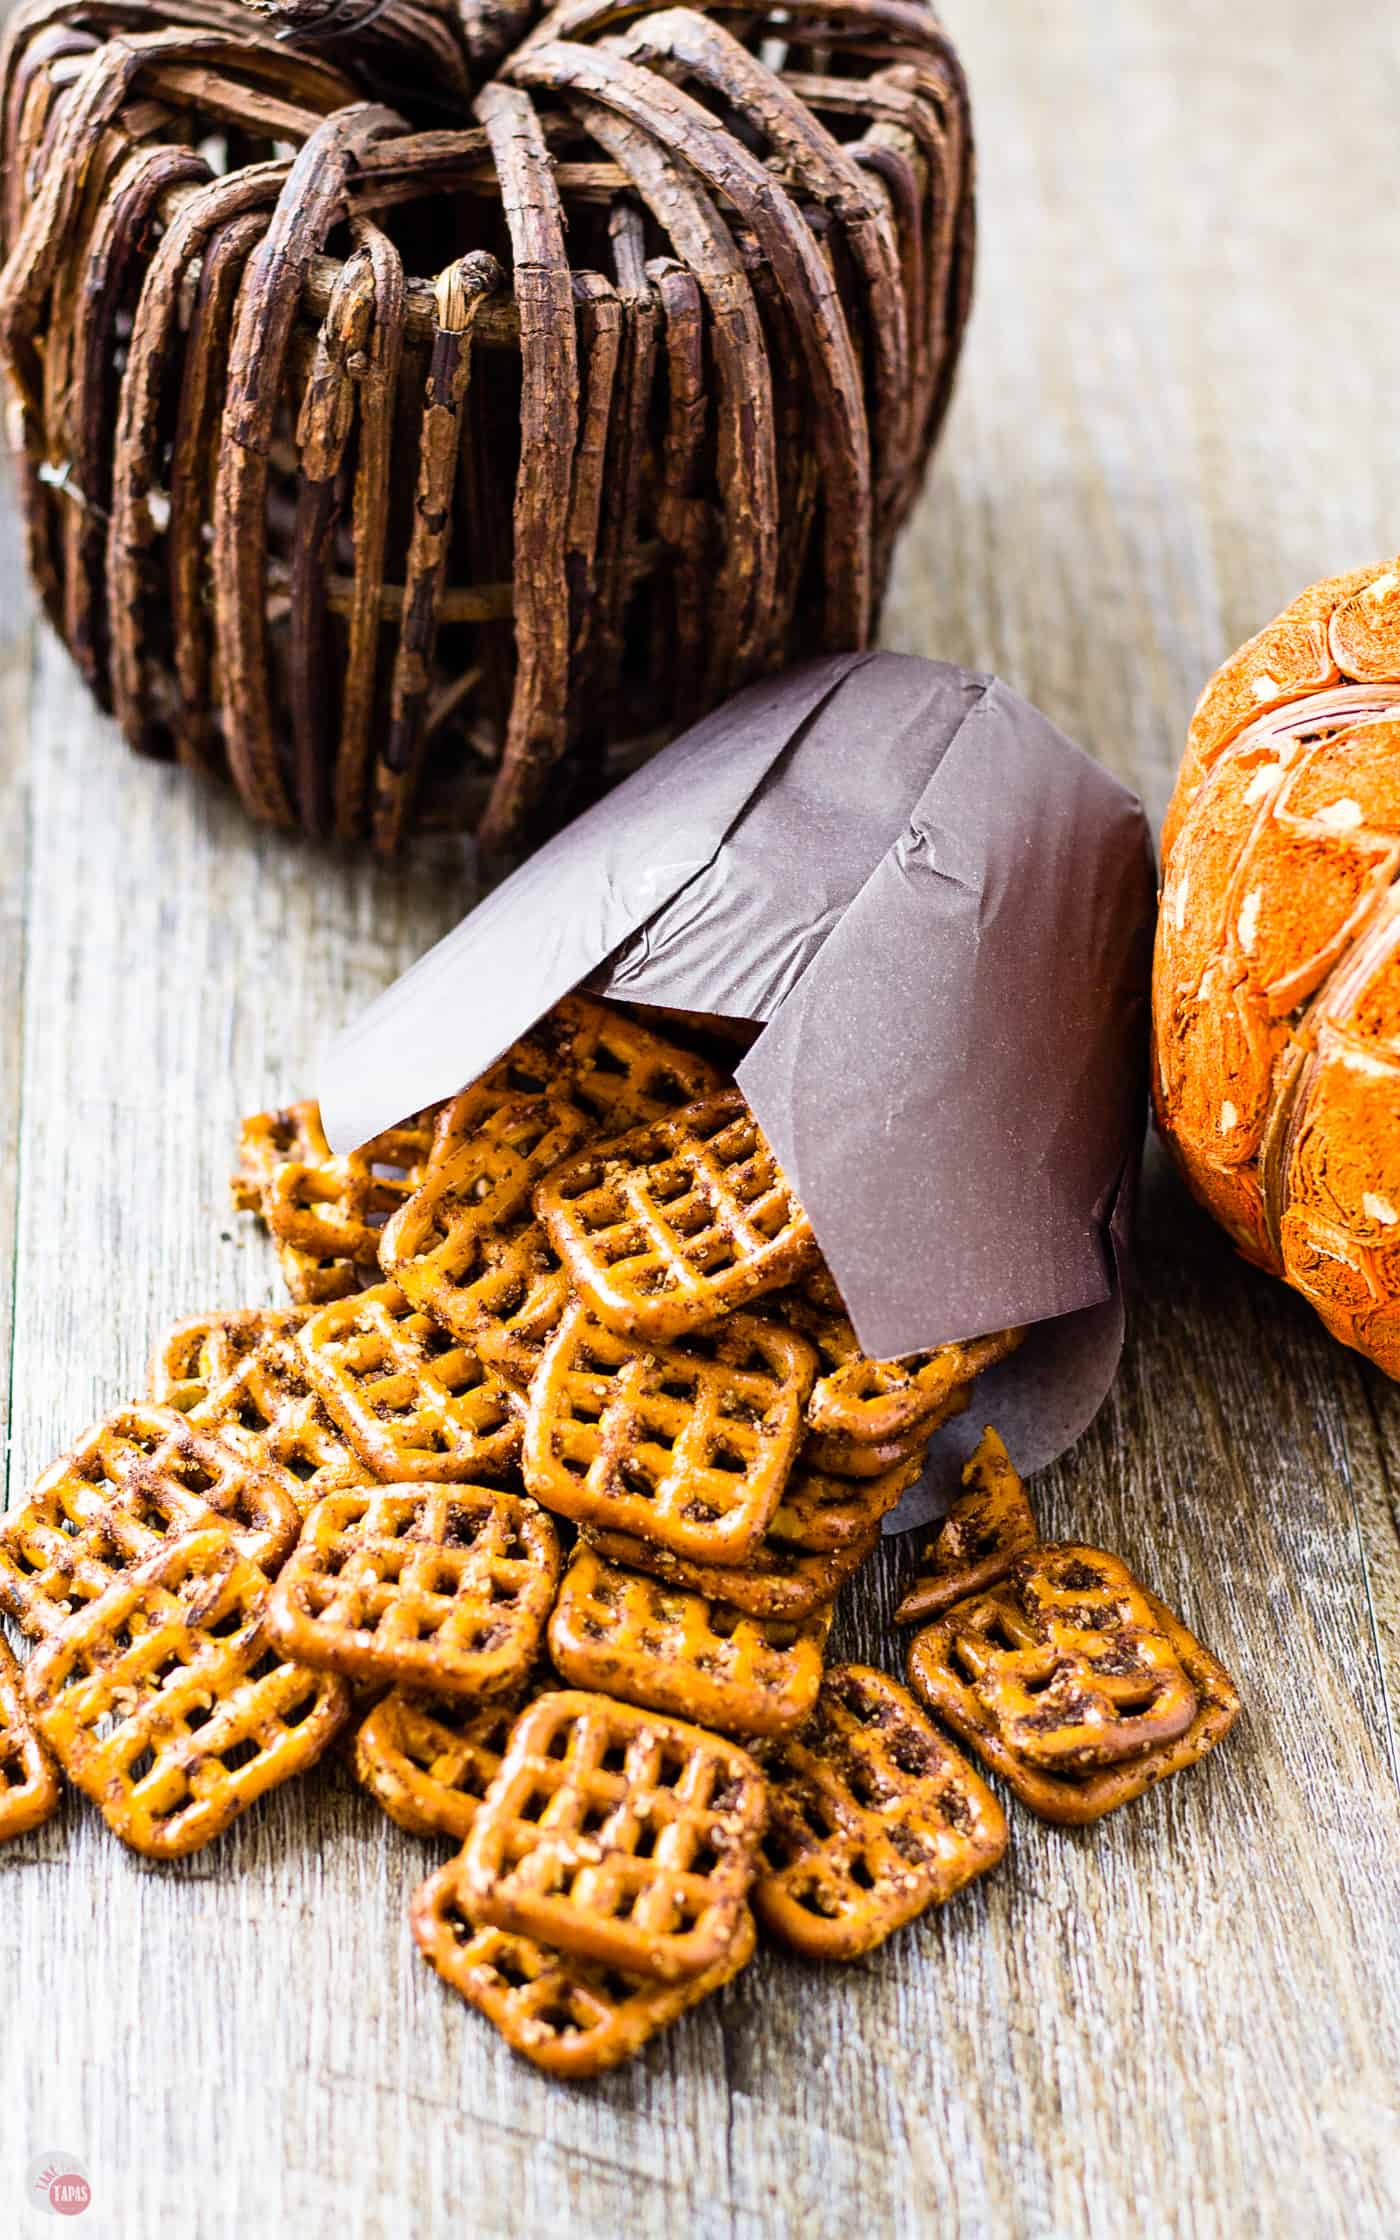 Grab a handful of my Pumpkin Spice Espresso Pretzels for some tasty crunchy fun | Take Two Tapas | #PumpkinPieSpice #PumpkinSpiceRecipes #Pretzels #Snacks #FallRecipes #ThanksgivingAppetizers